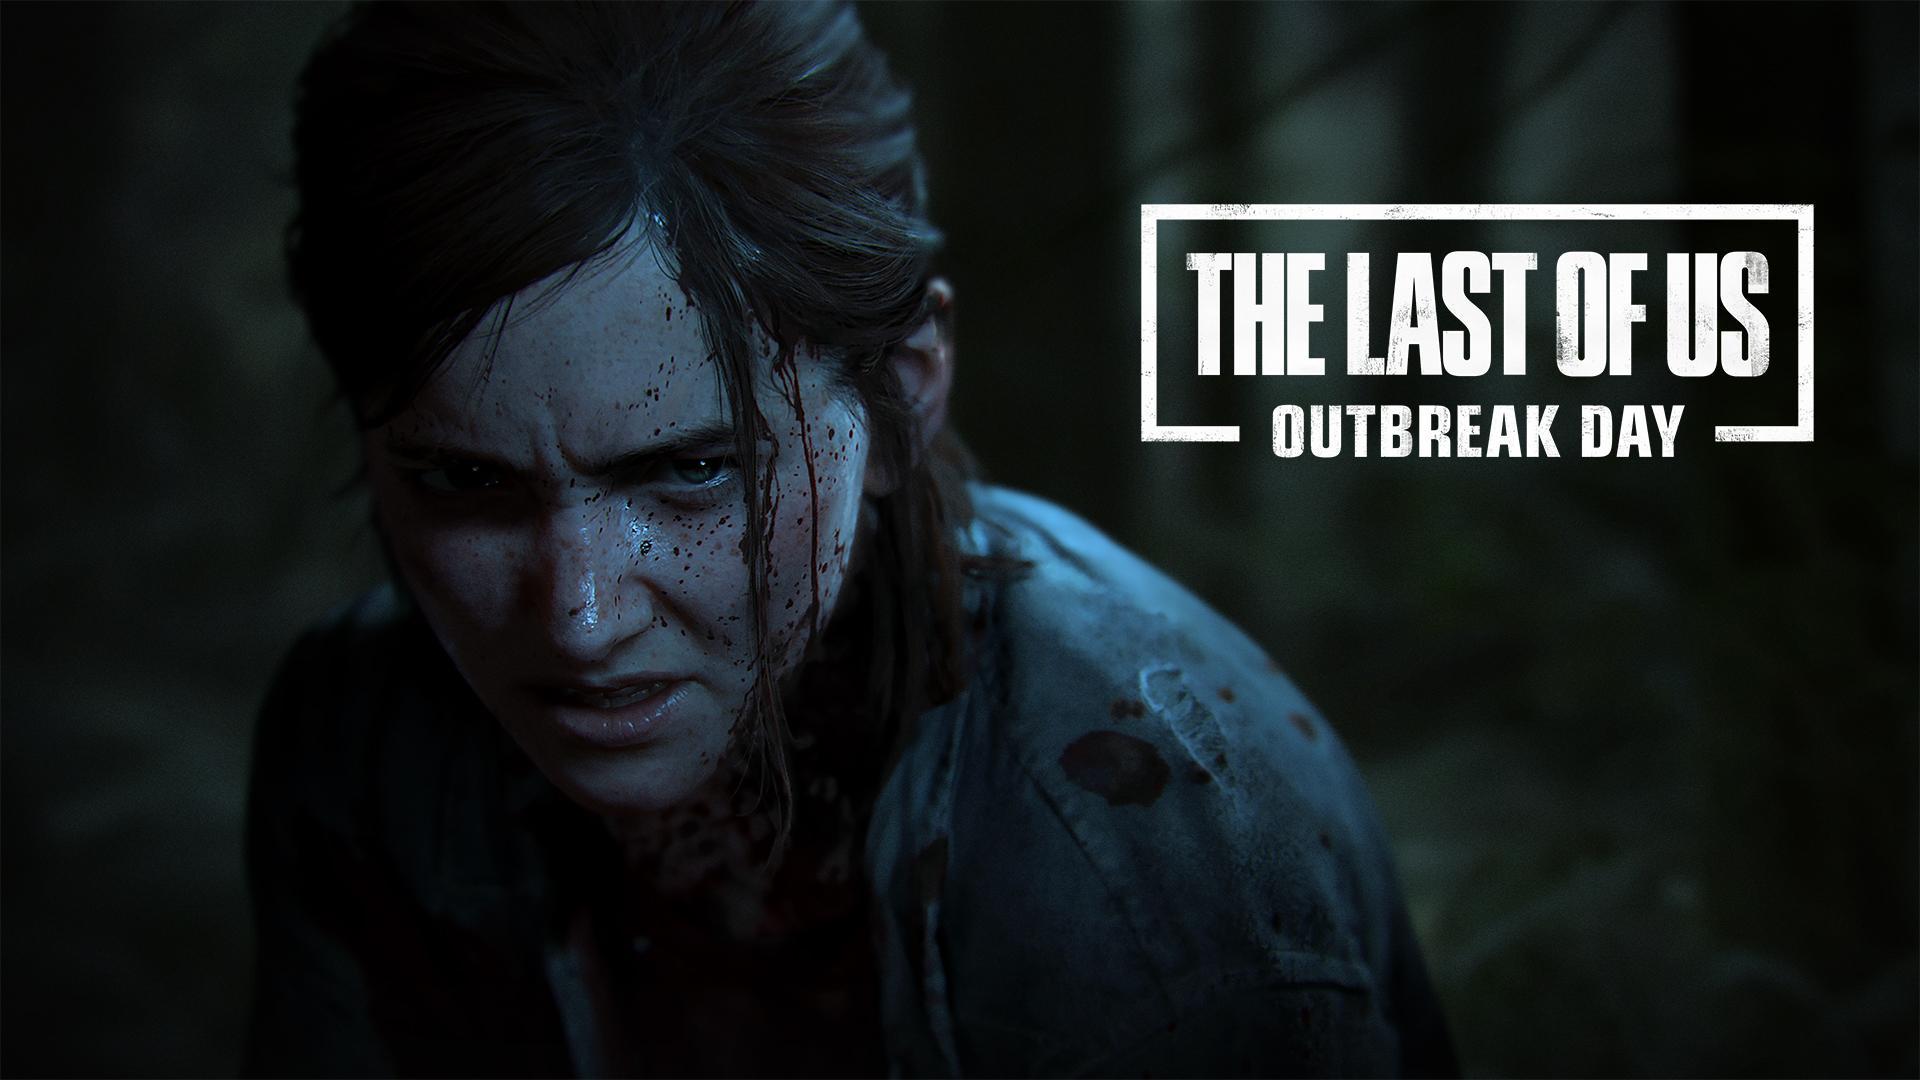 the last of us part 1 free download pc